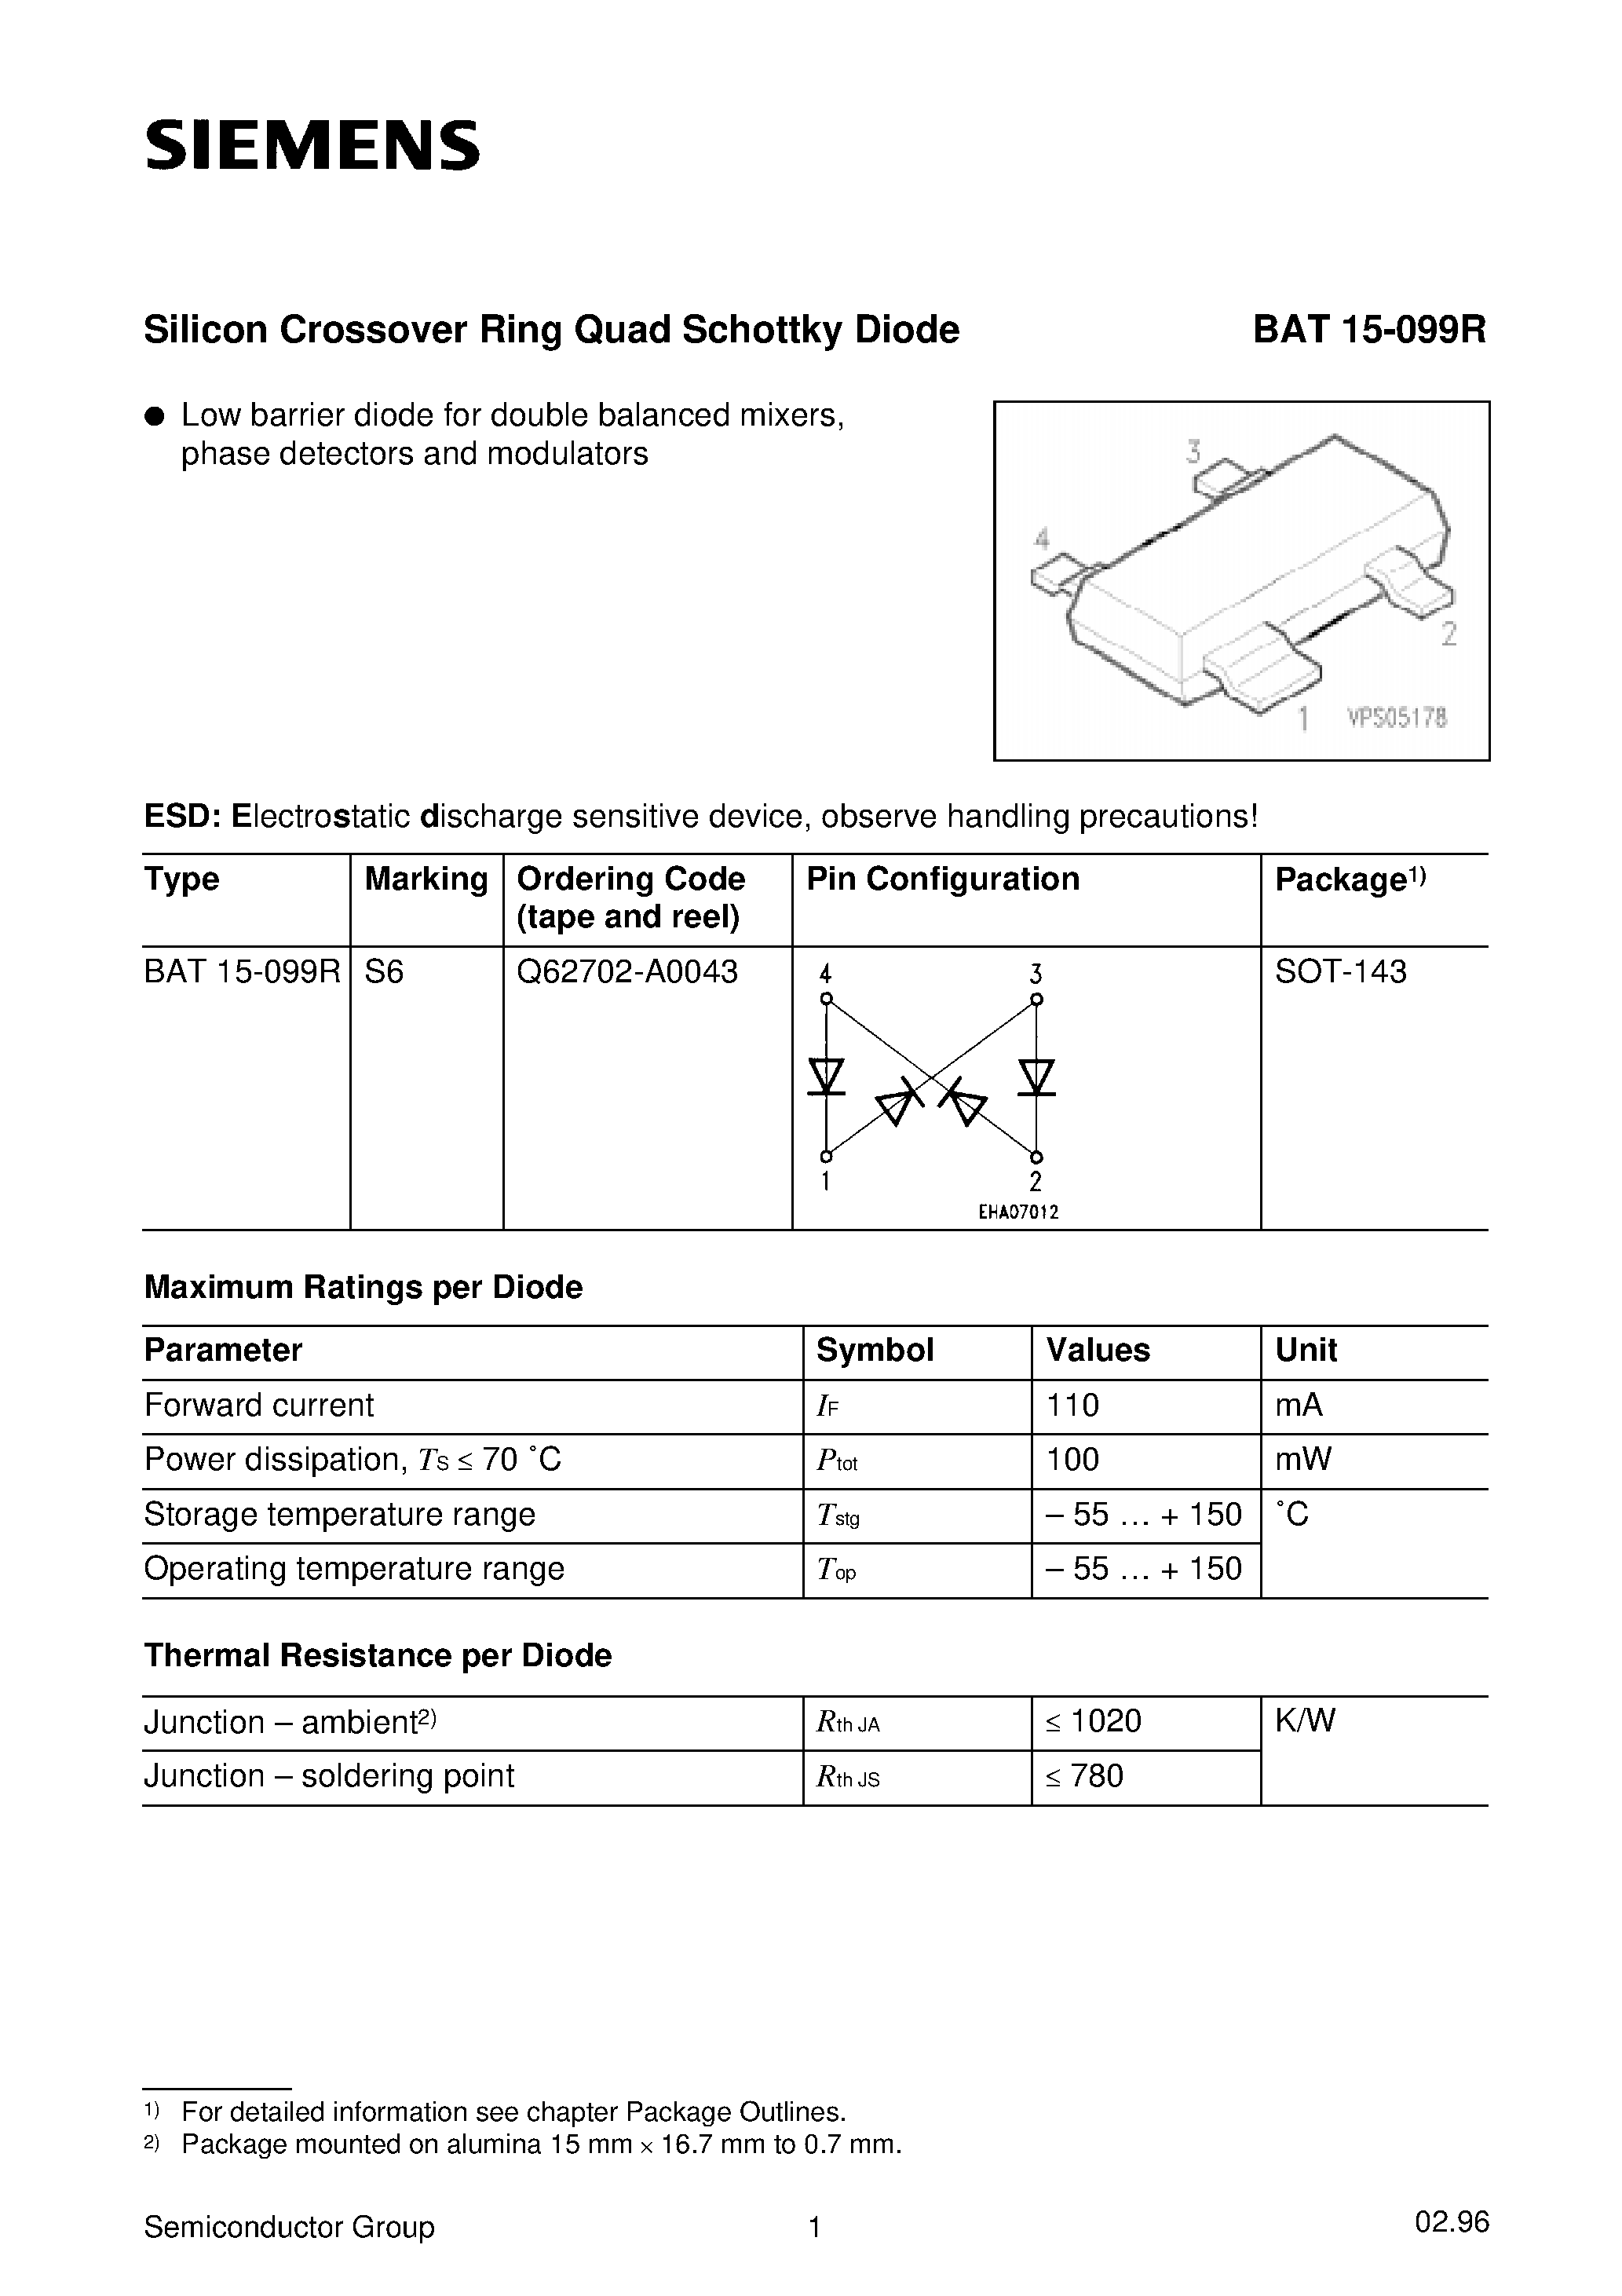 Datasheet BAT15-099R - Silicon Crossover Ring Quad Schottky Diode (Low barrier diode for double balanced mixers/ phase detectors and modulators) page 1